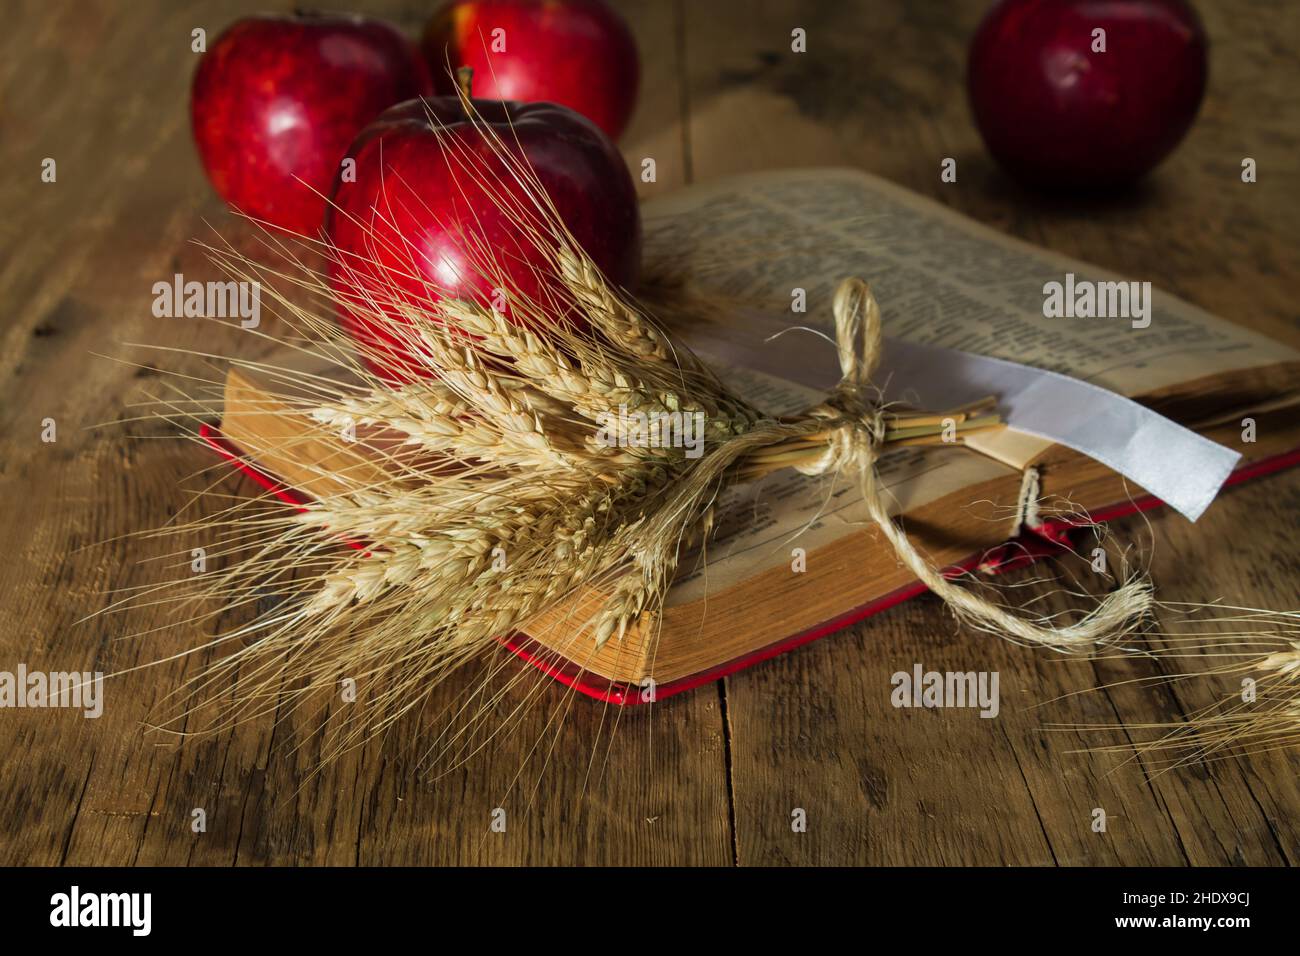 rural scene, still life, rustic, country, country life, rural, rural scenes, still lifes, rustics Stock Photo